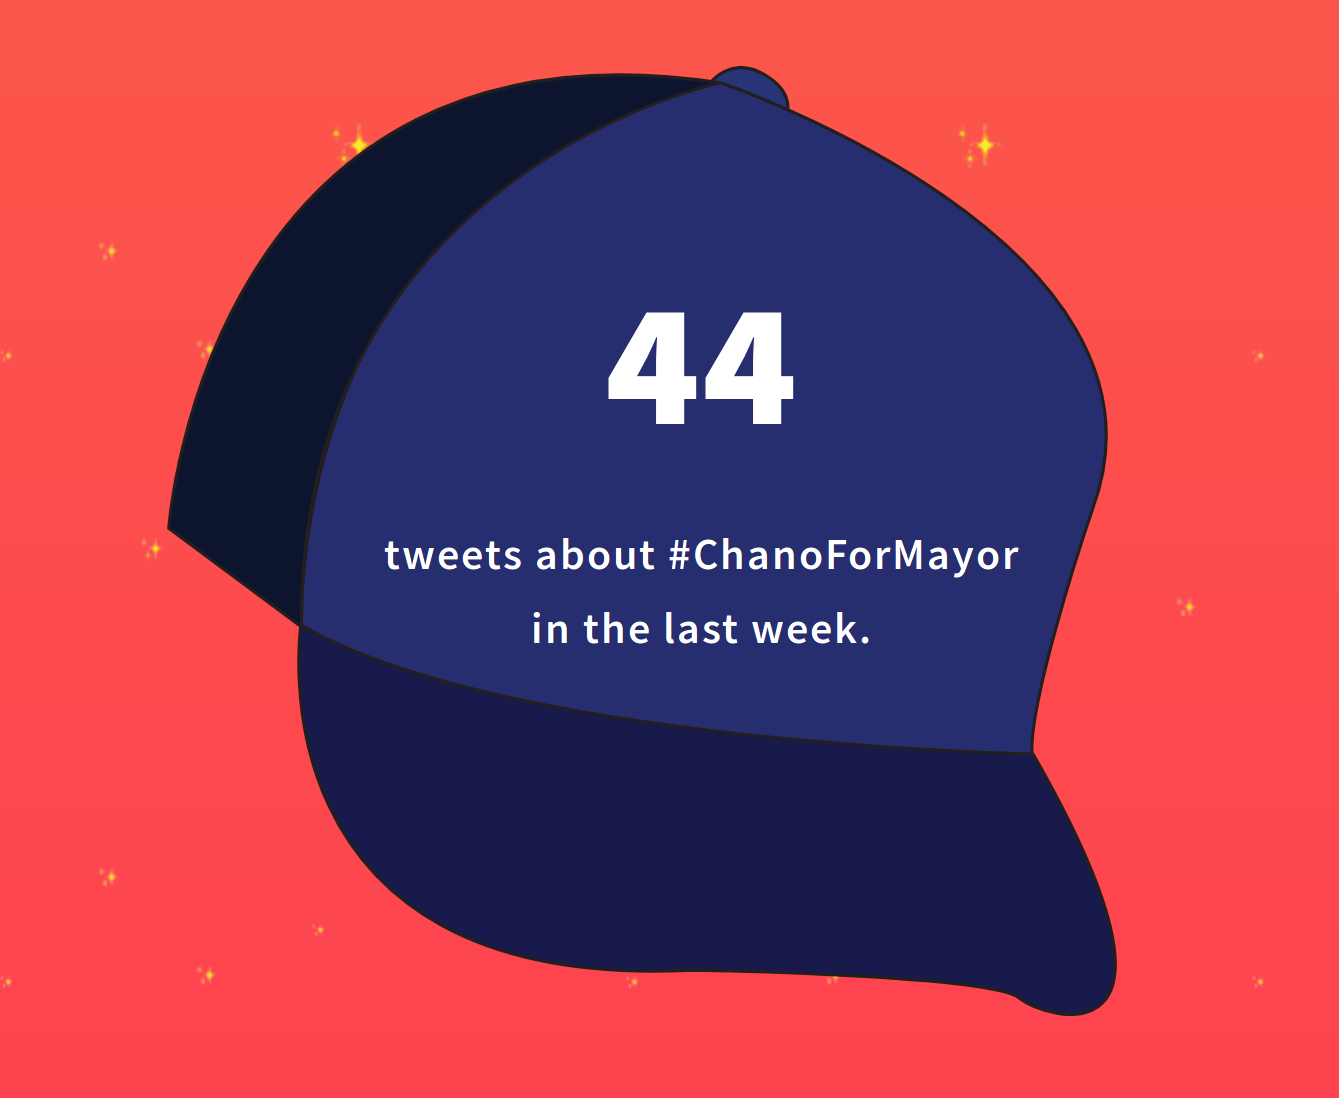 "An excerpt from chano4mayor.com. An illustration of Chance's famous
hat shows that 44 people have tweeted the hashtag #chano4mayor
this week."